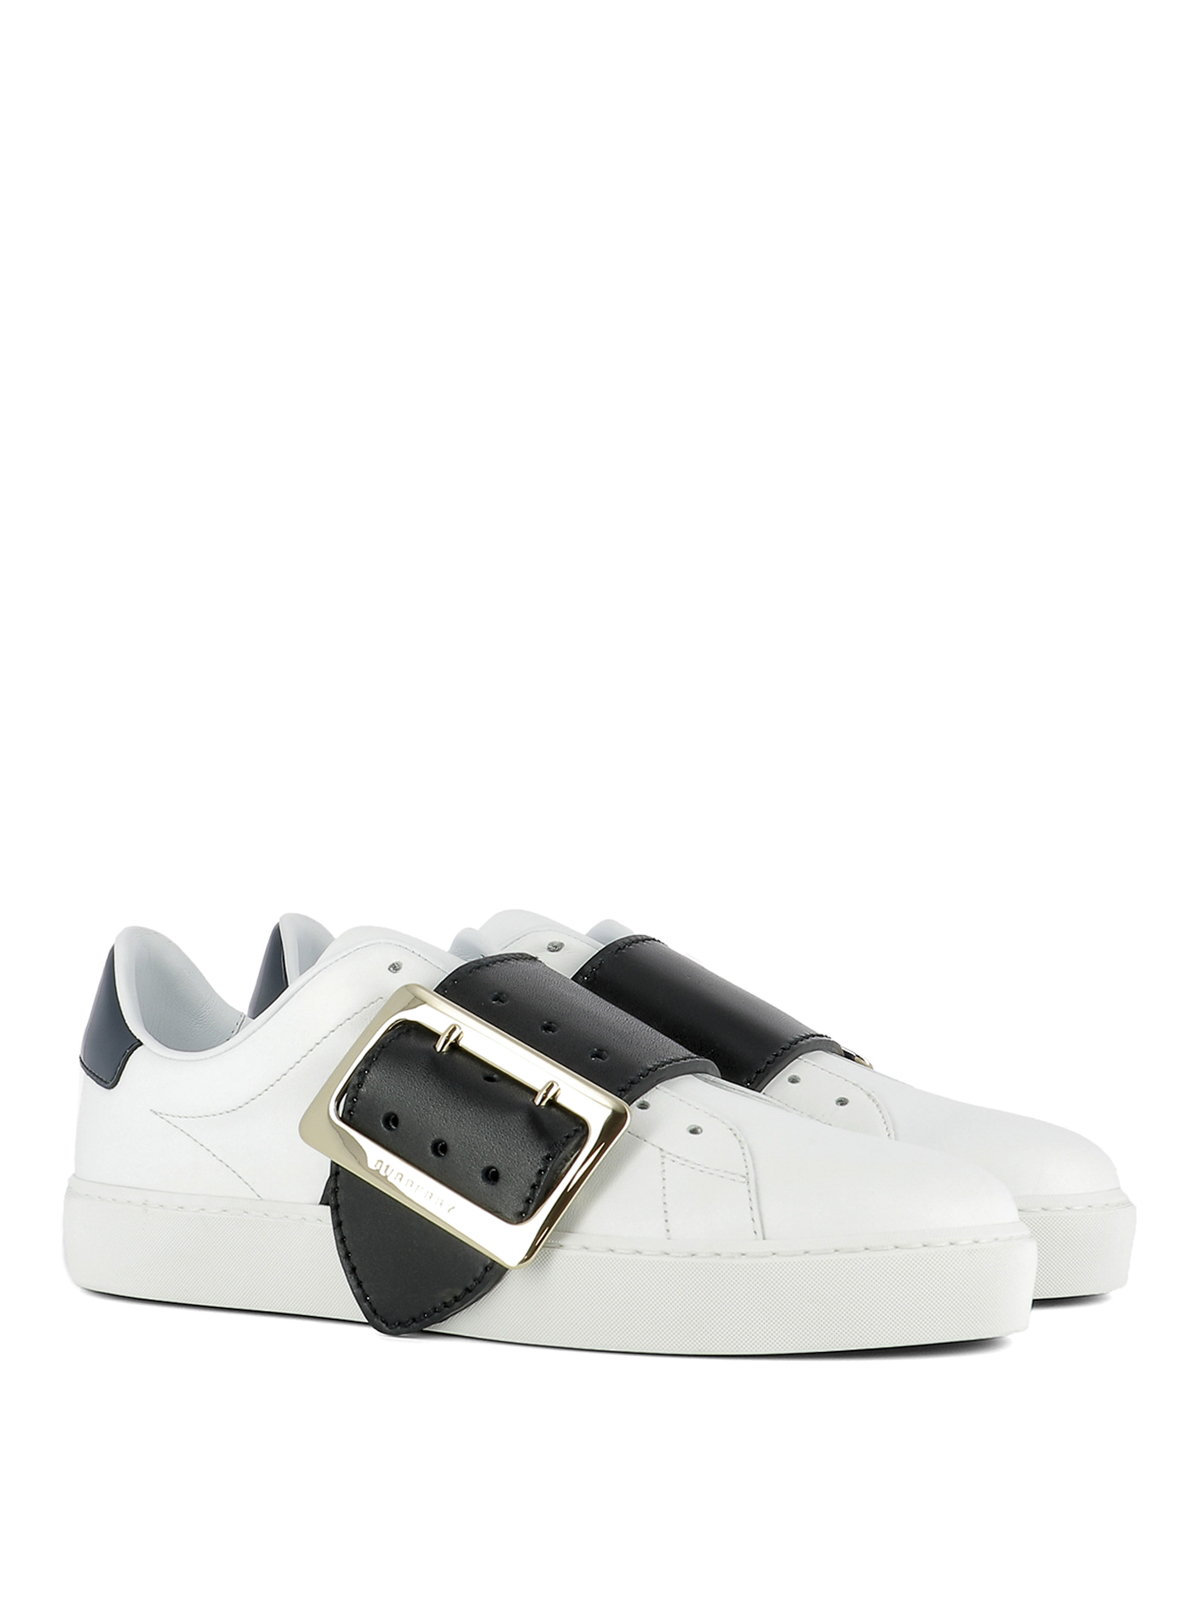 Trainers Burberry - Westford leather sneakers - 4037428 